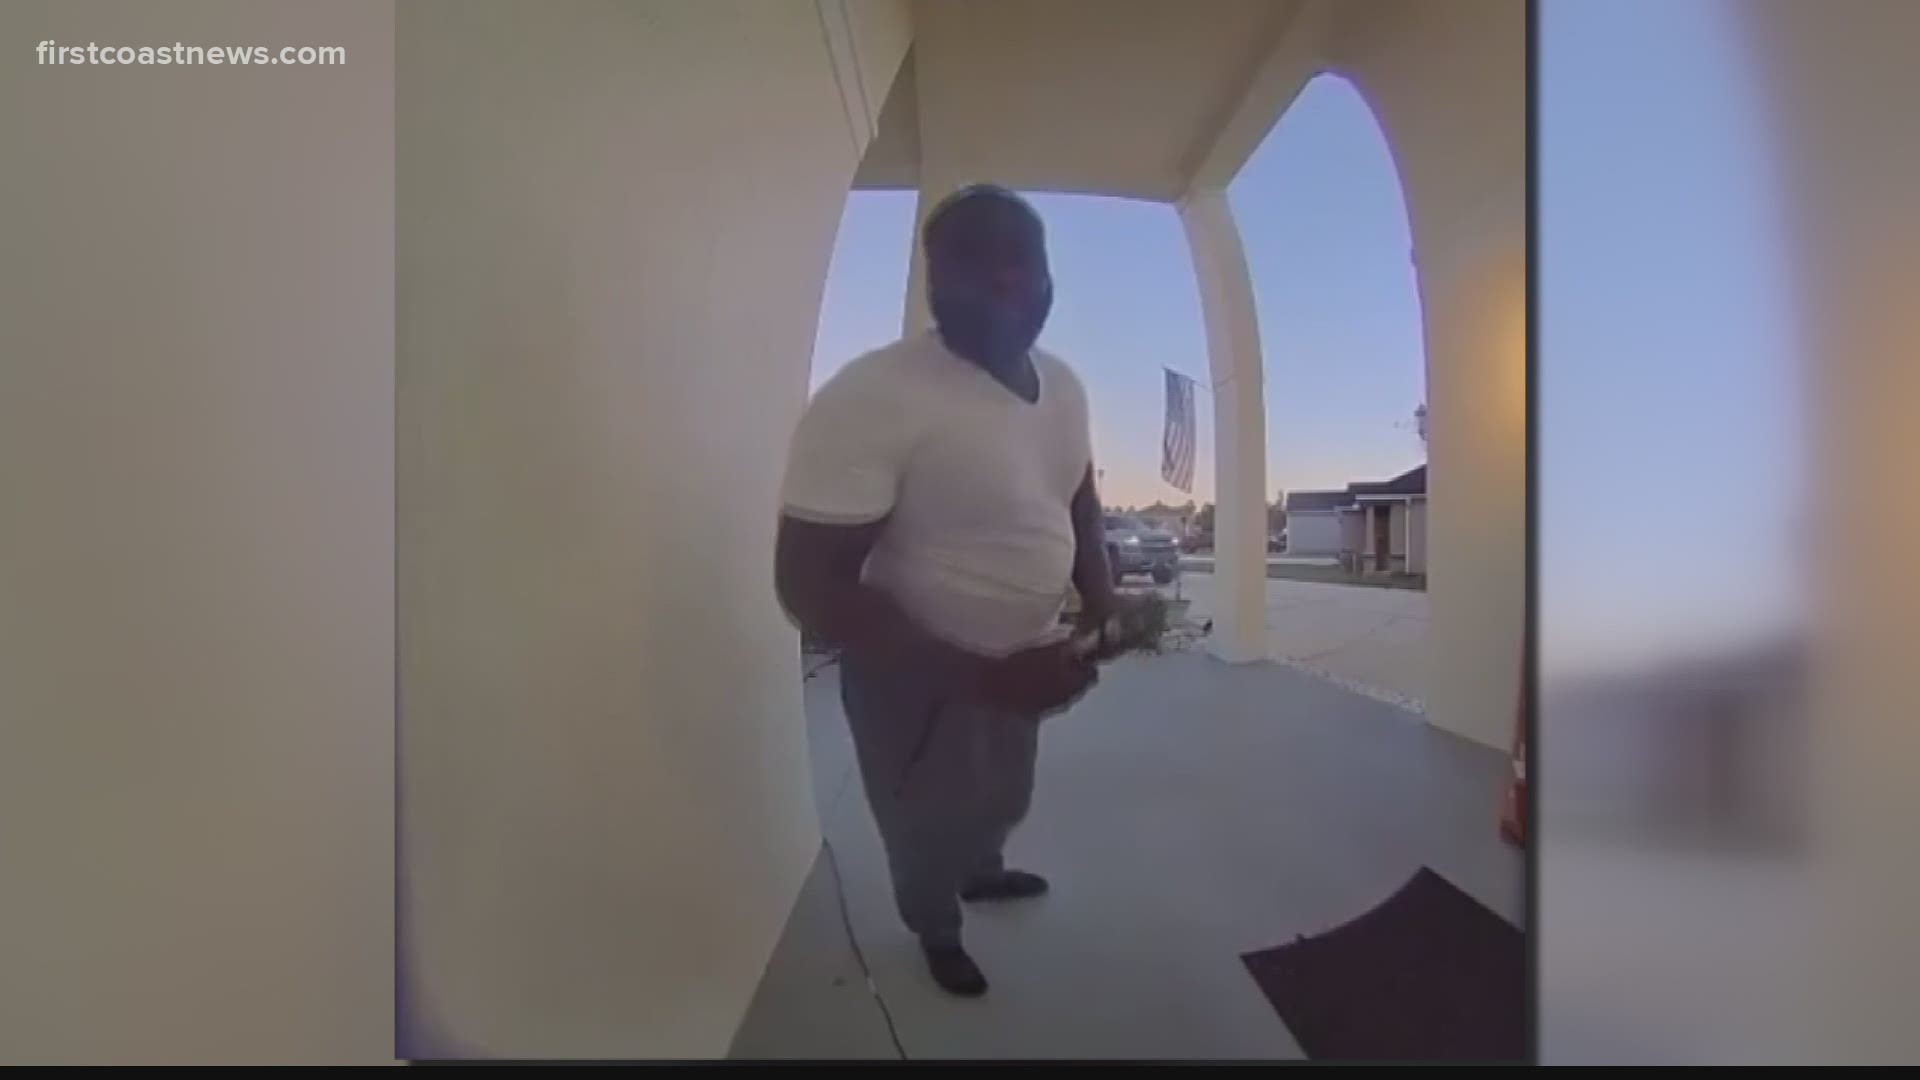 Doorbell video shows him approaching the home and ringing the bell saying, "Hey, how are you doing? I found your wallet at Walmart."